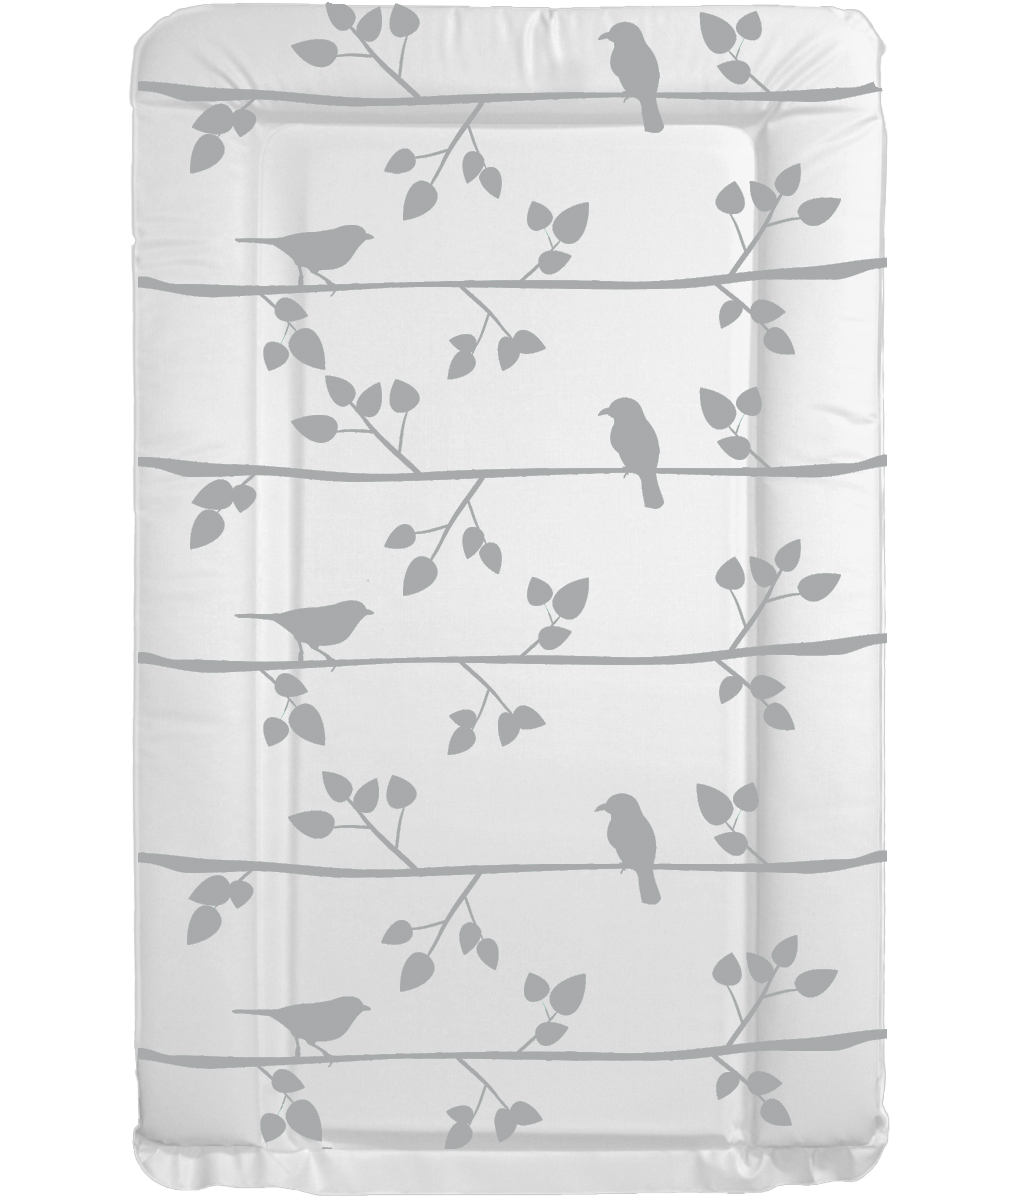 MollyDoo UK Made Baby Boys Girls Changing Mat Birds on a Branch Pink or Grey 